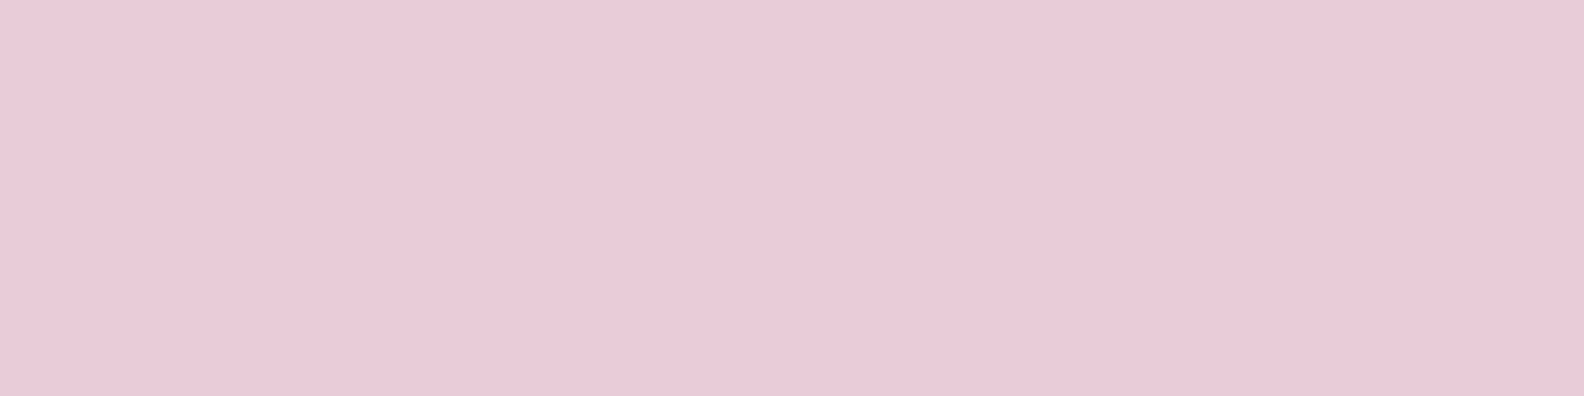 1584x396 Queen Pink Solid Color Background